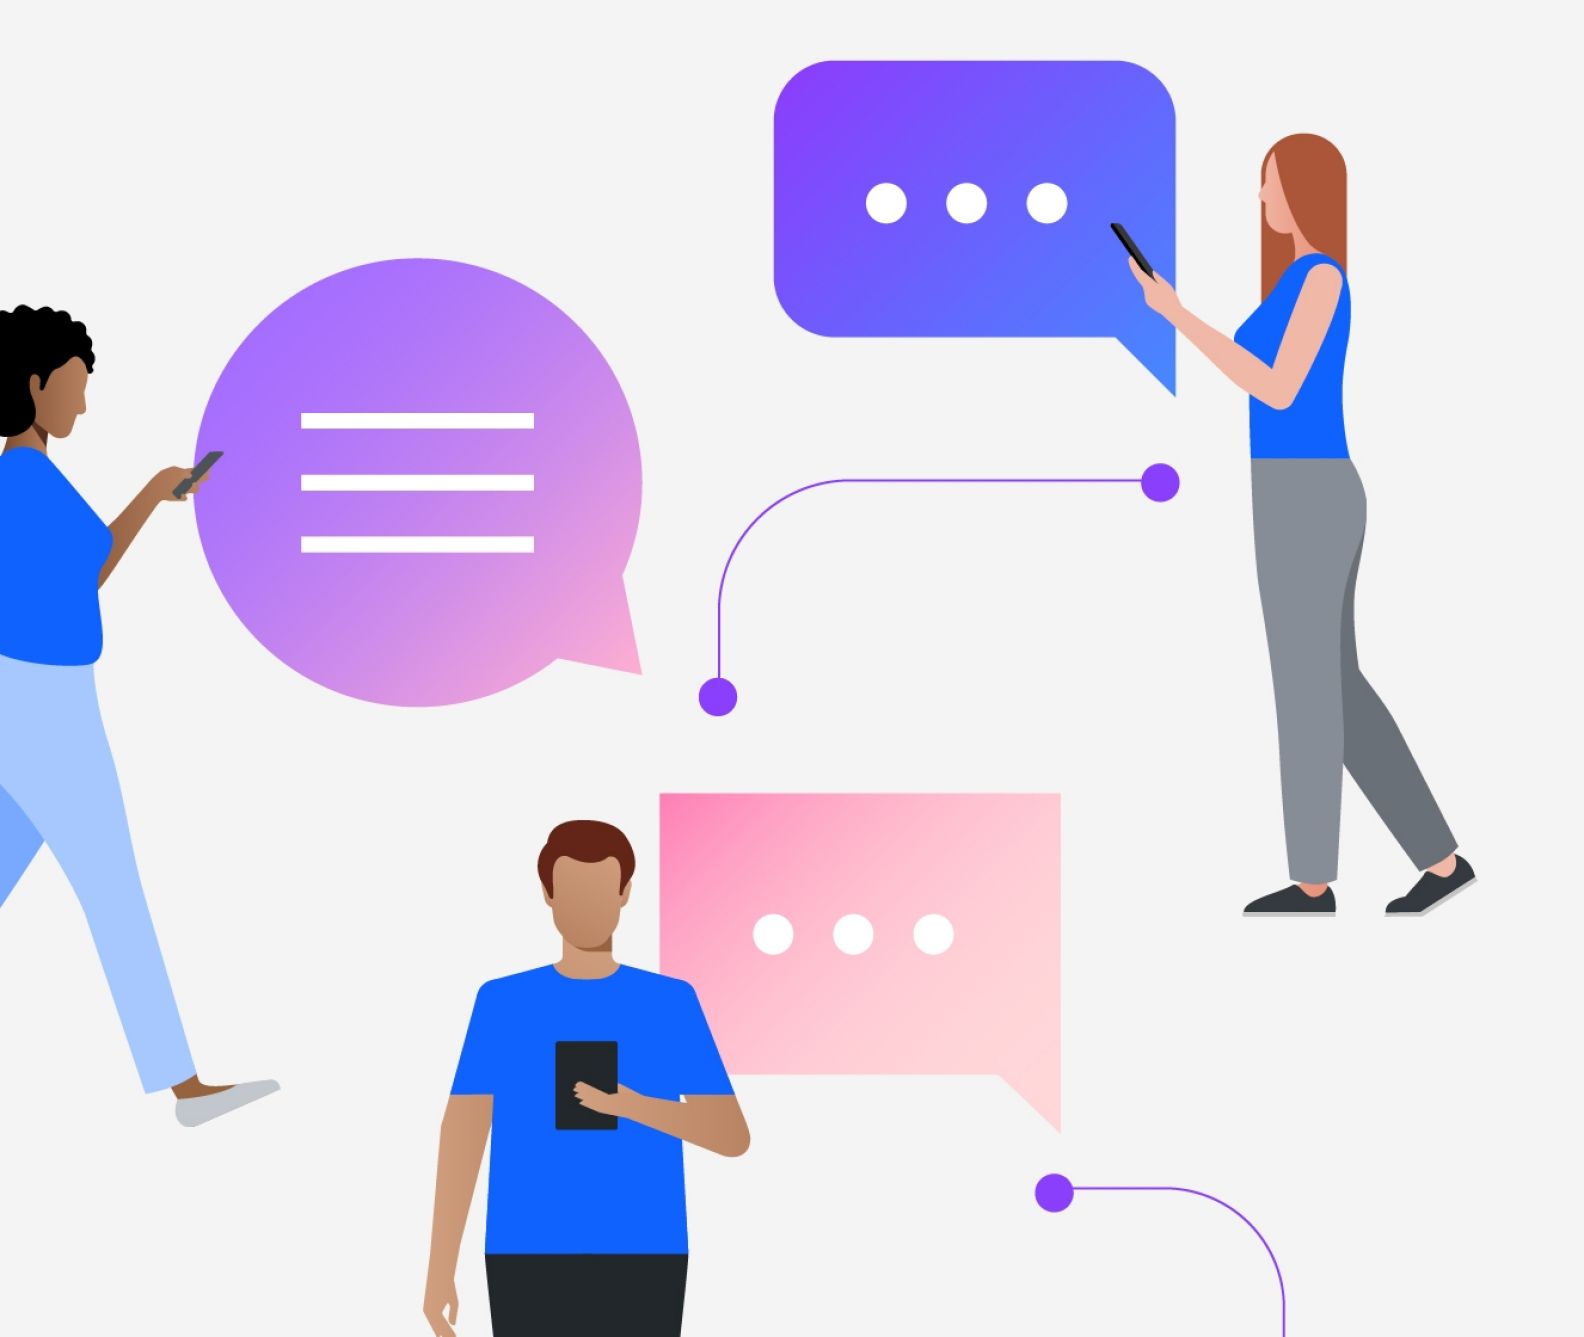 Illustration of sentiment analysis featuring people using chatbots